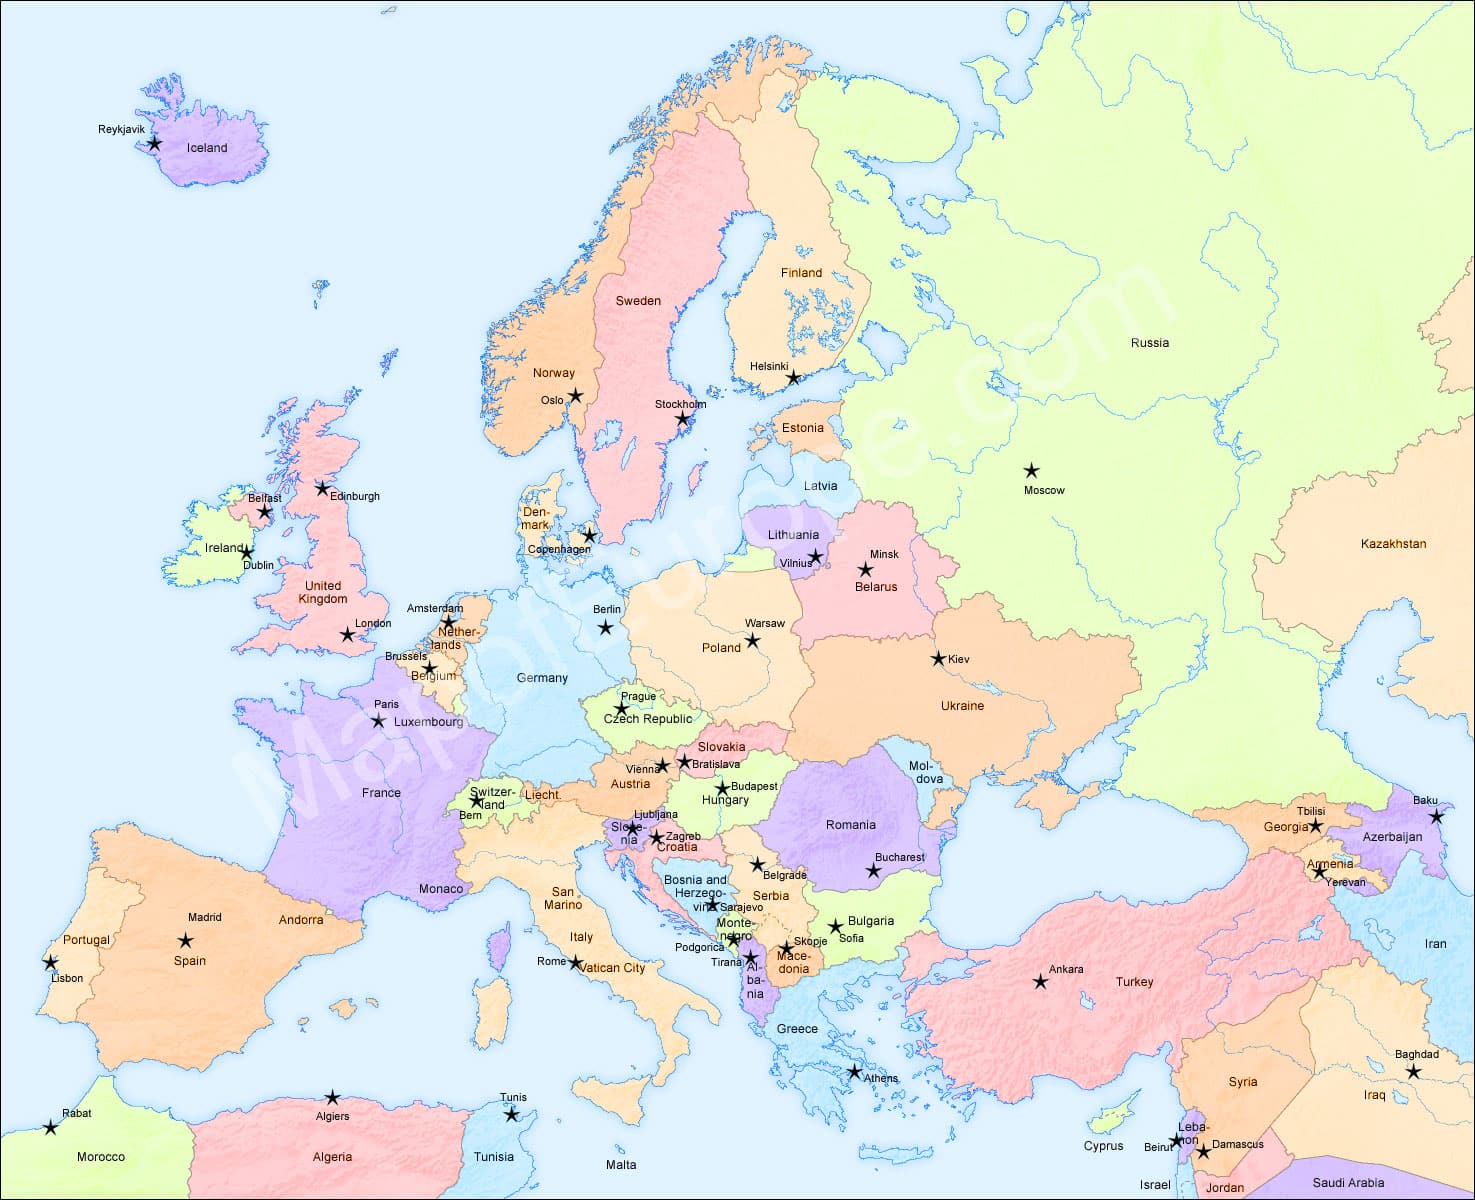 Map of Europe | Europe Map - Geography, History, Travel Tips and Fun